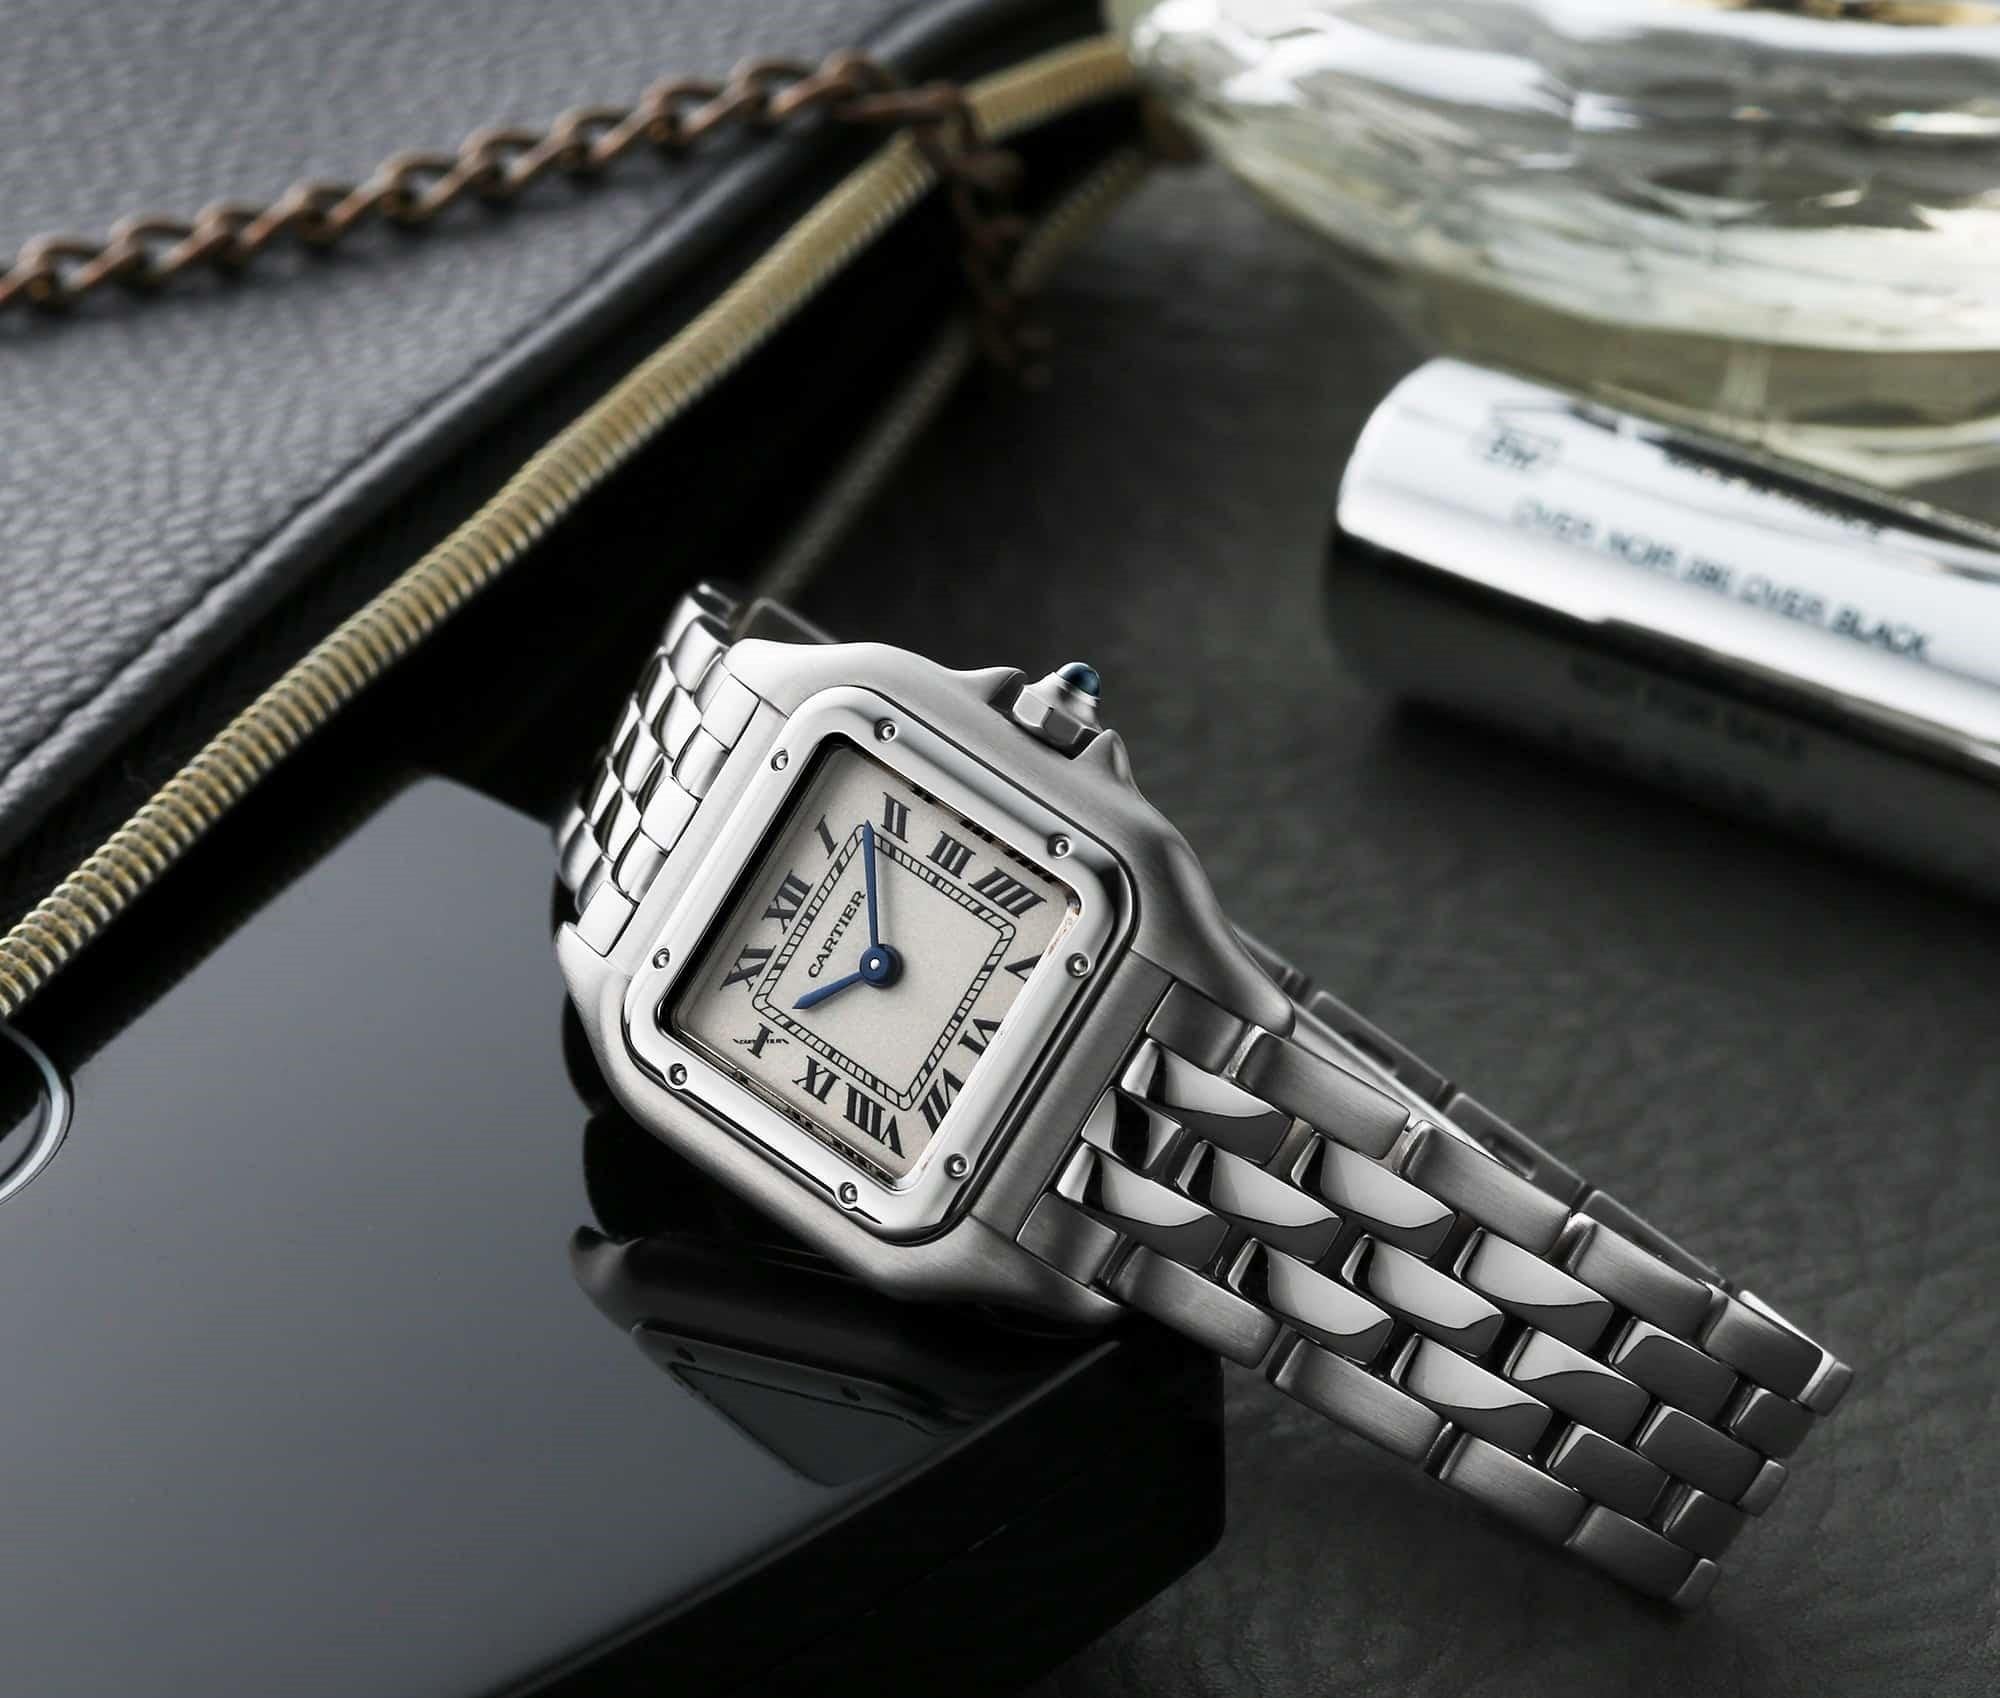 Unveil the essence of timeless elegance and unparalleled craftsmanship with this exquisite Cartier Panthère SM W25033P5 women's watch. A testament to Cartier's legacy of luxury watchmaking, this second-hand treasure combines classic style with